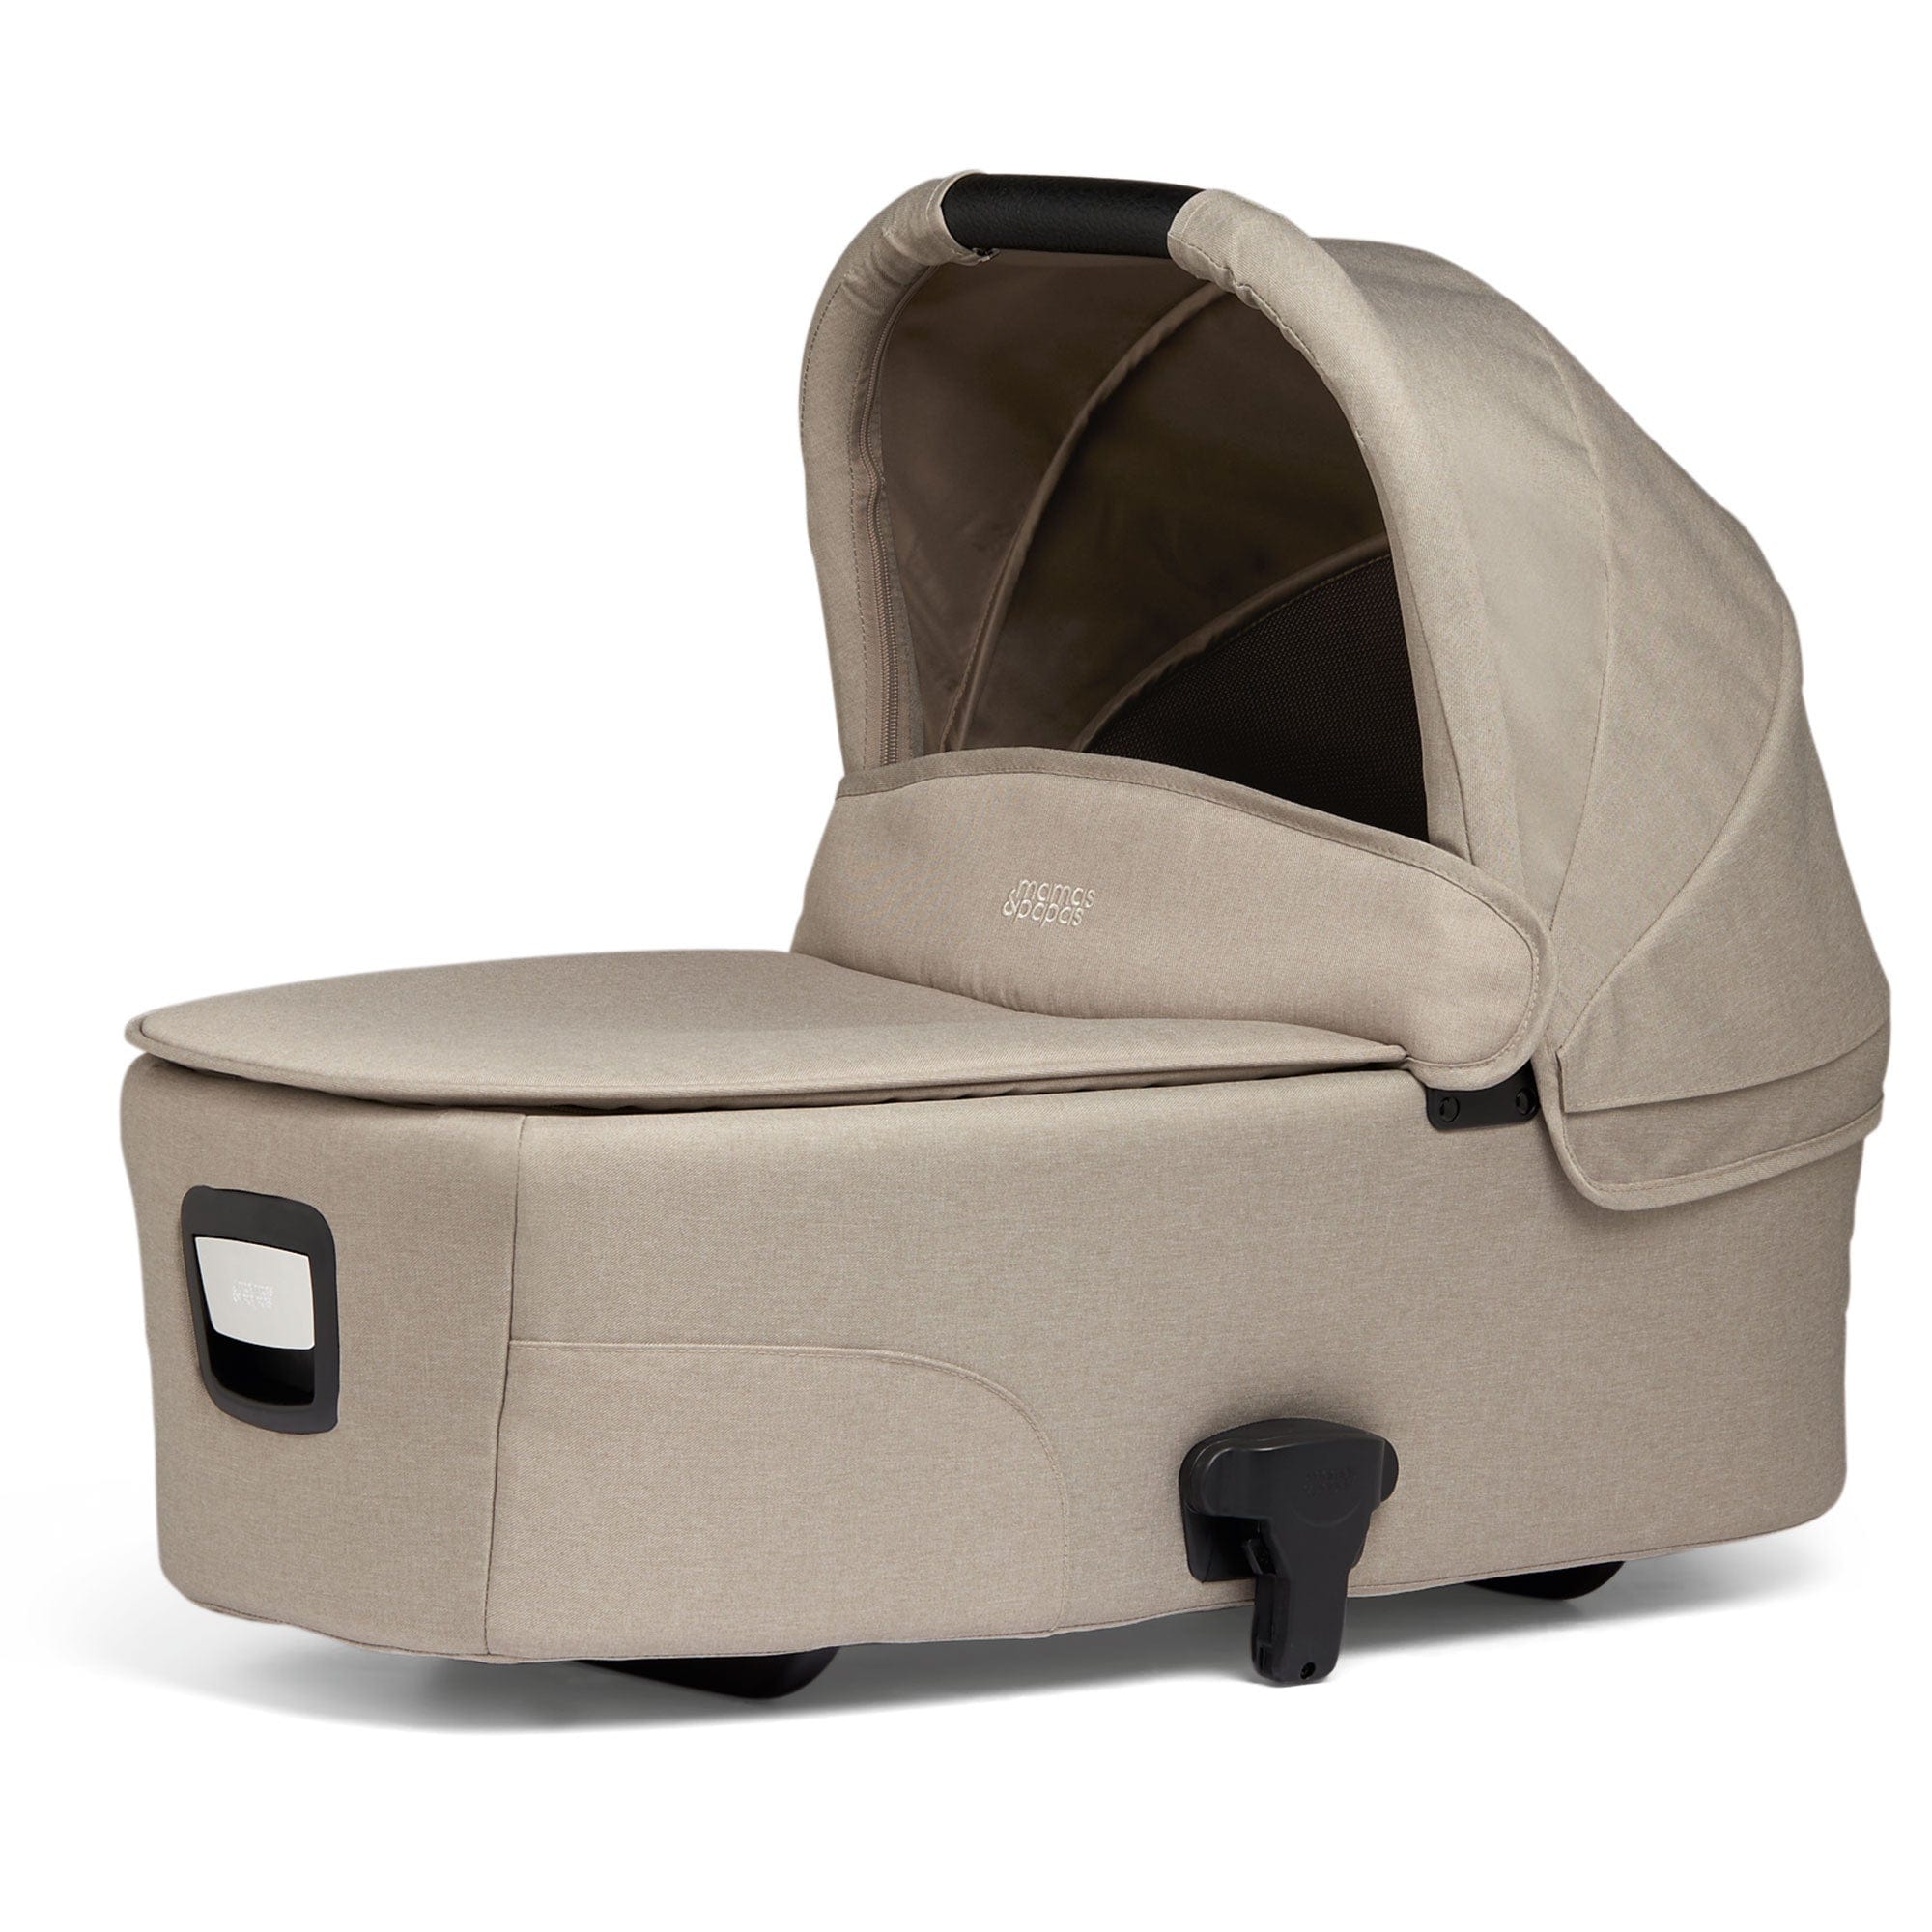 Mamas & Papas Flip XT³ 8 Piece Essentials Bundle with Car Seat in Fawn Travel Systems